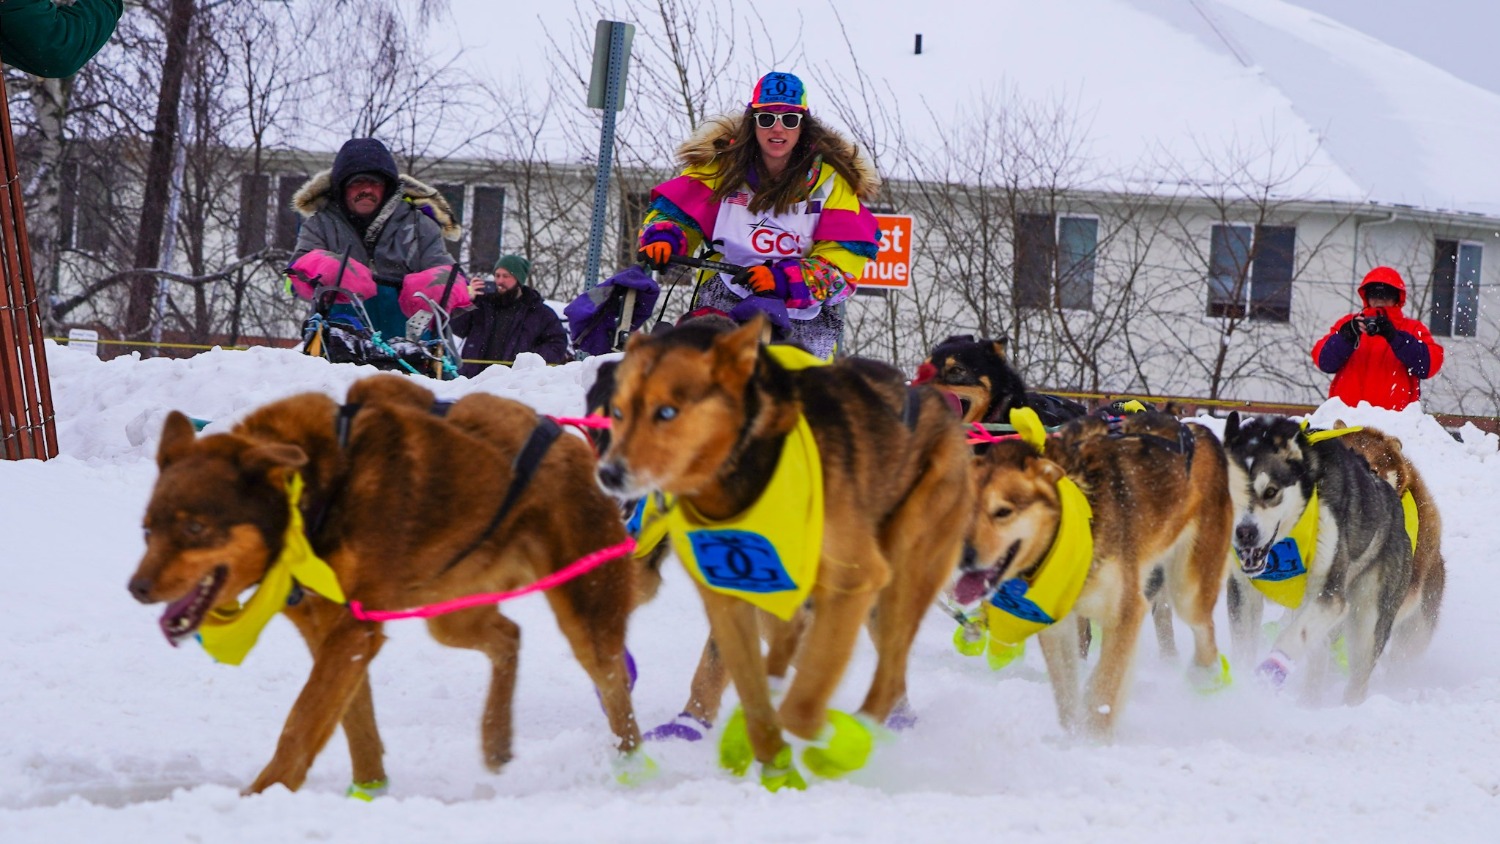 DGM Scouts the 2020 Iditarod for an Interaction Design Project